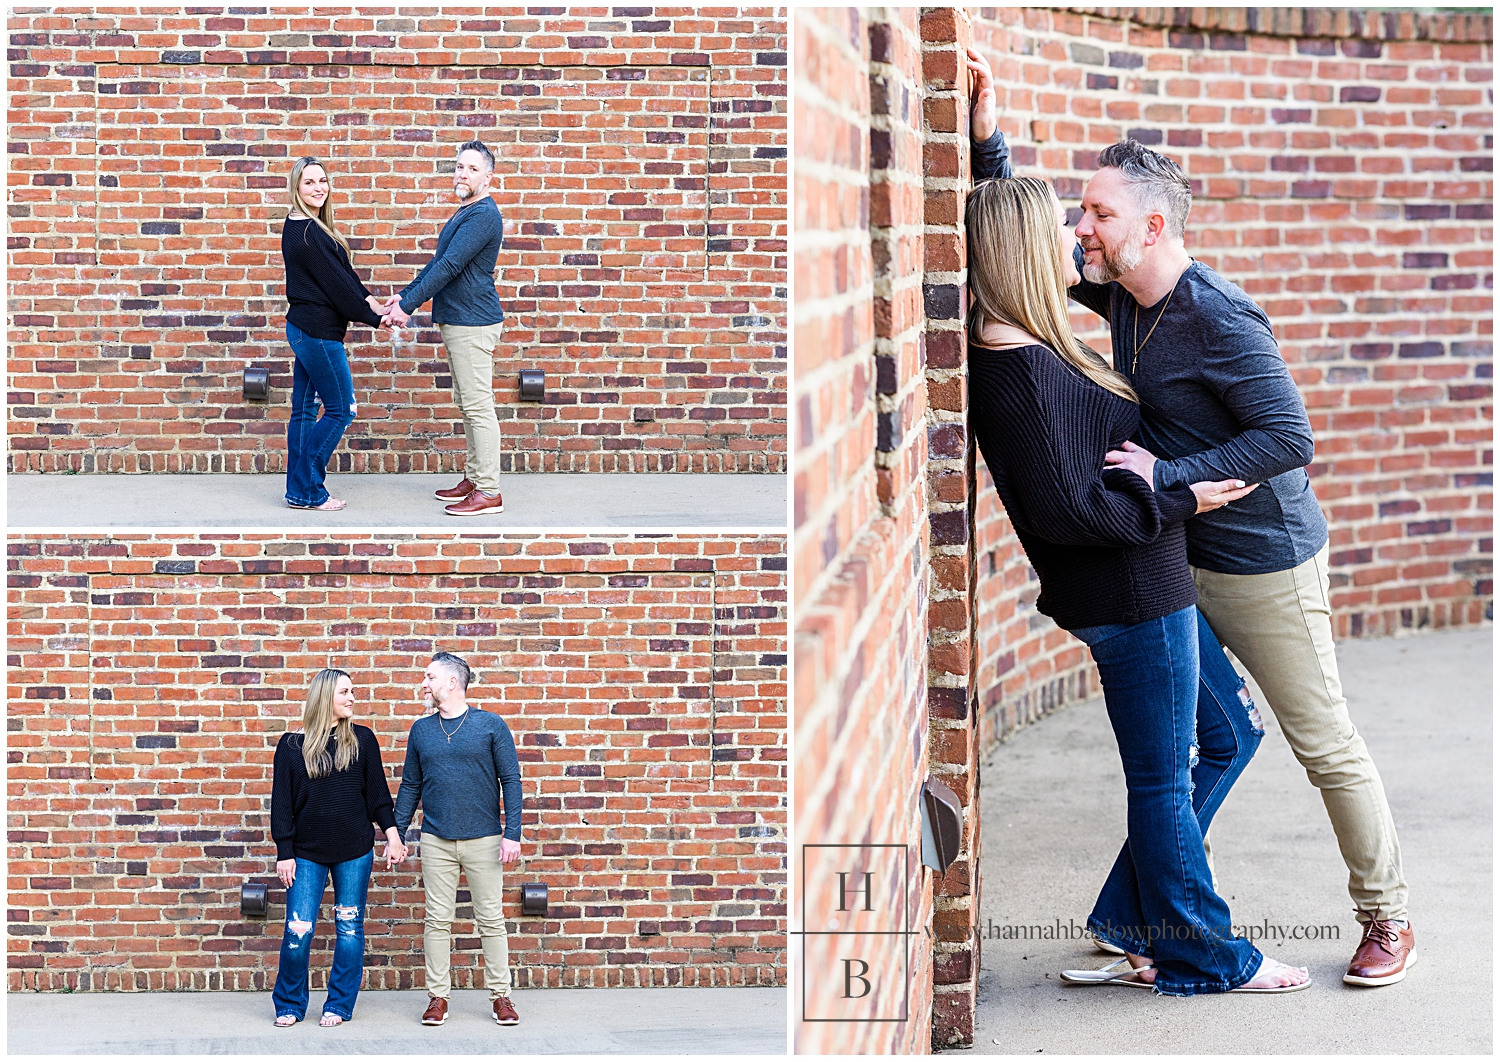 Couple poses for engagement photos in front of brick wall.